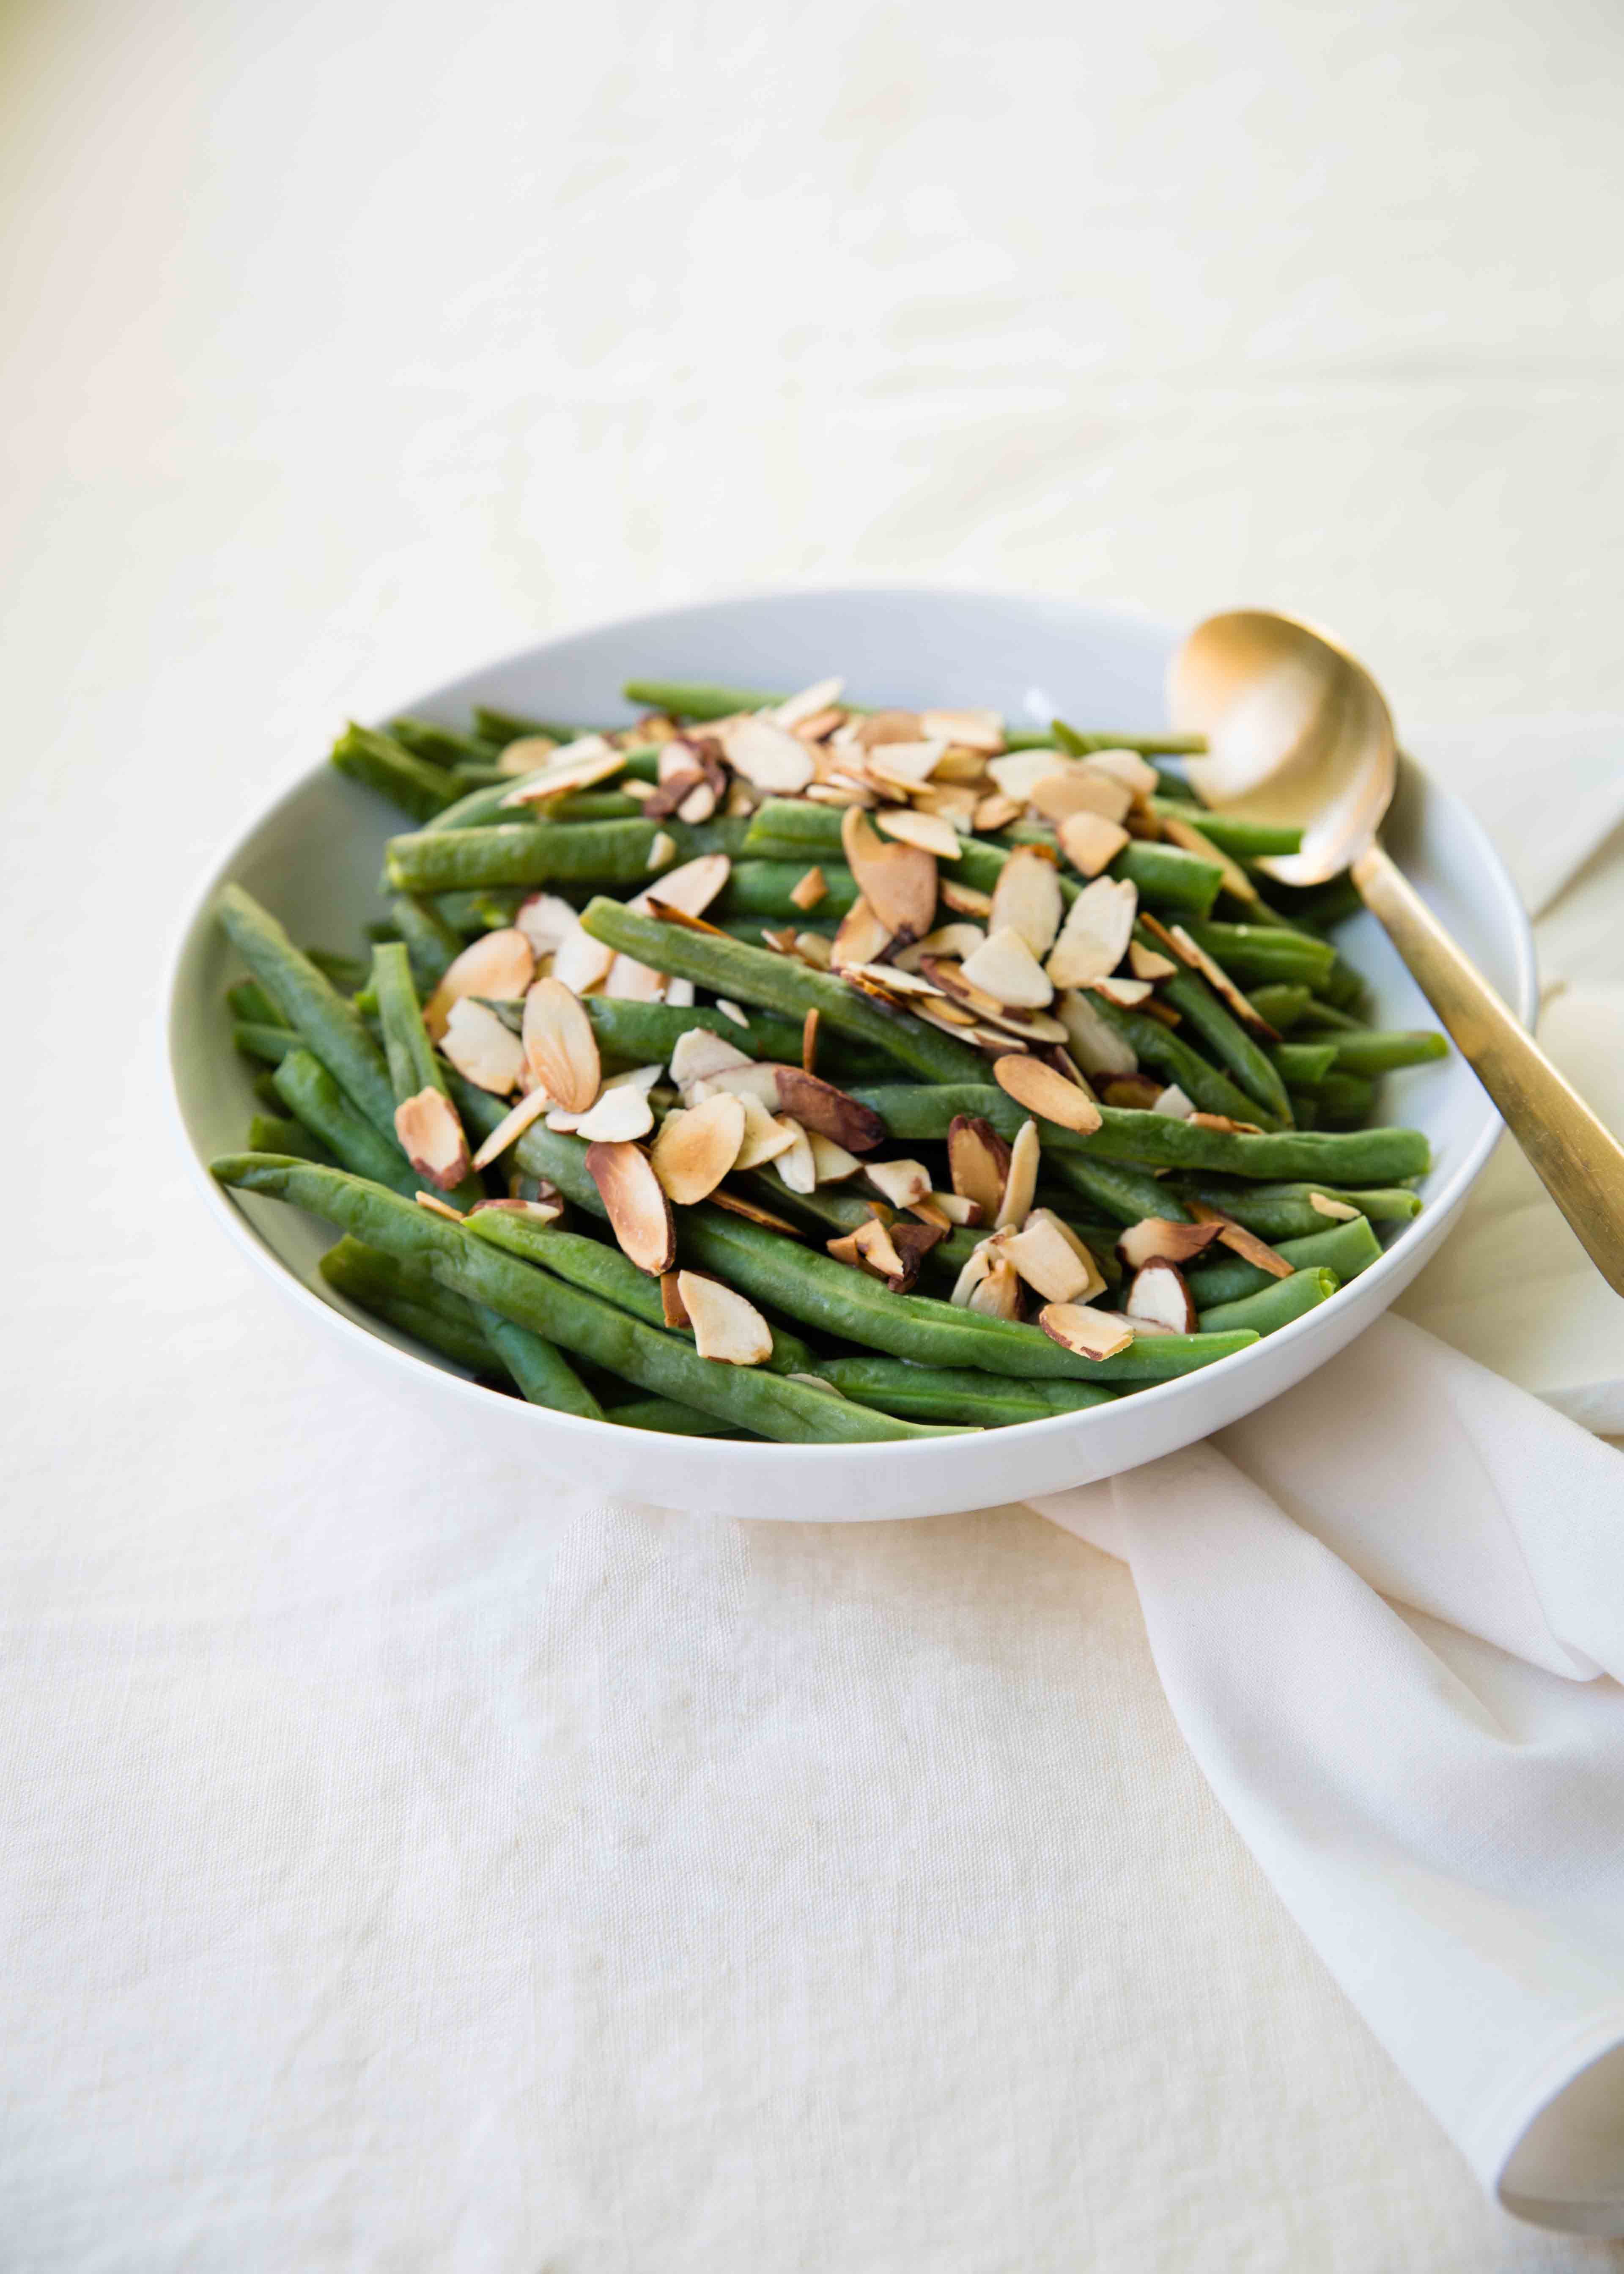 Jazz up green beans with this easy technique of bringing lemony flavor to Lemon Green Bean Almondine - anneliesz